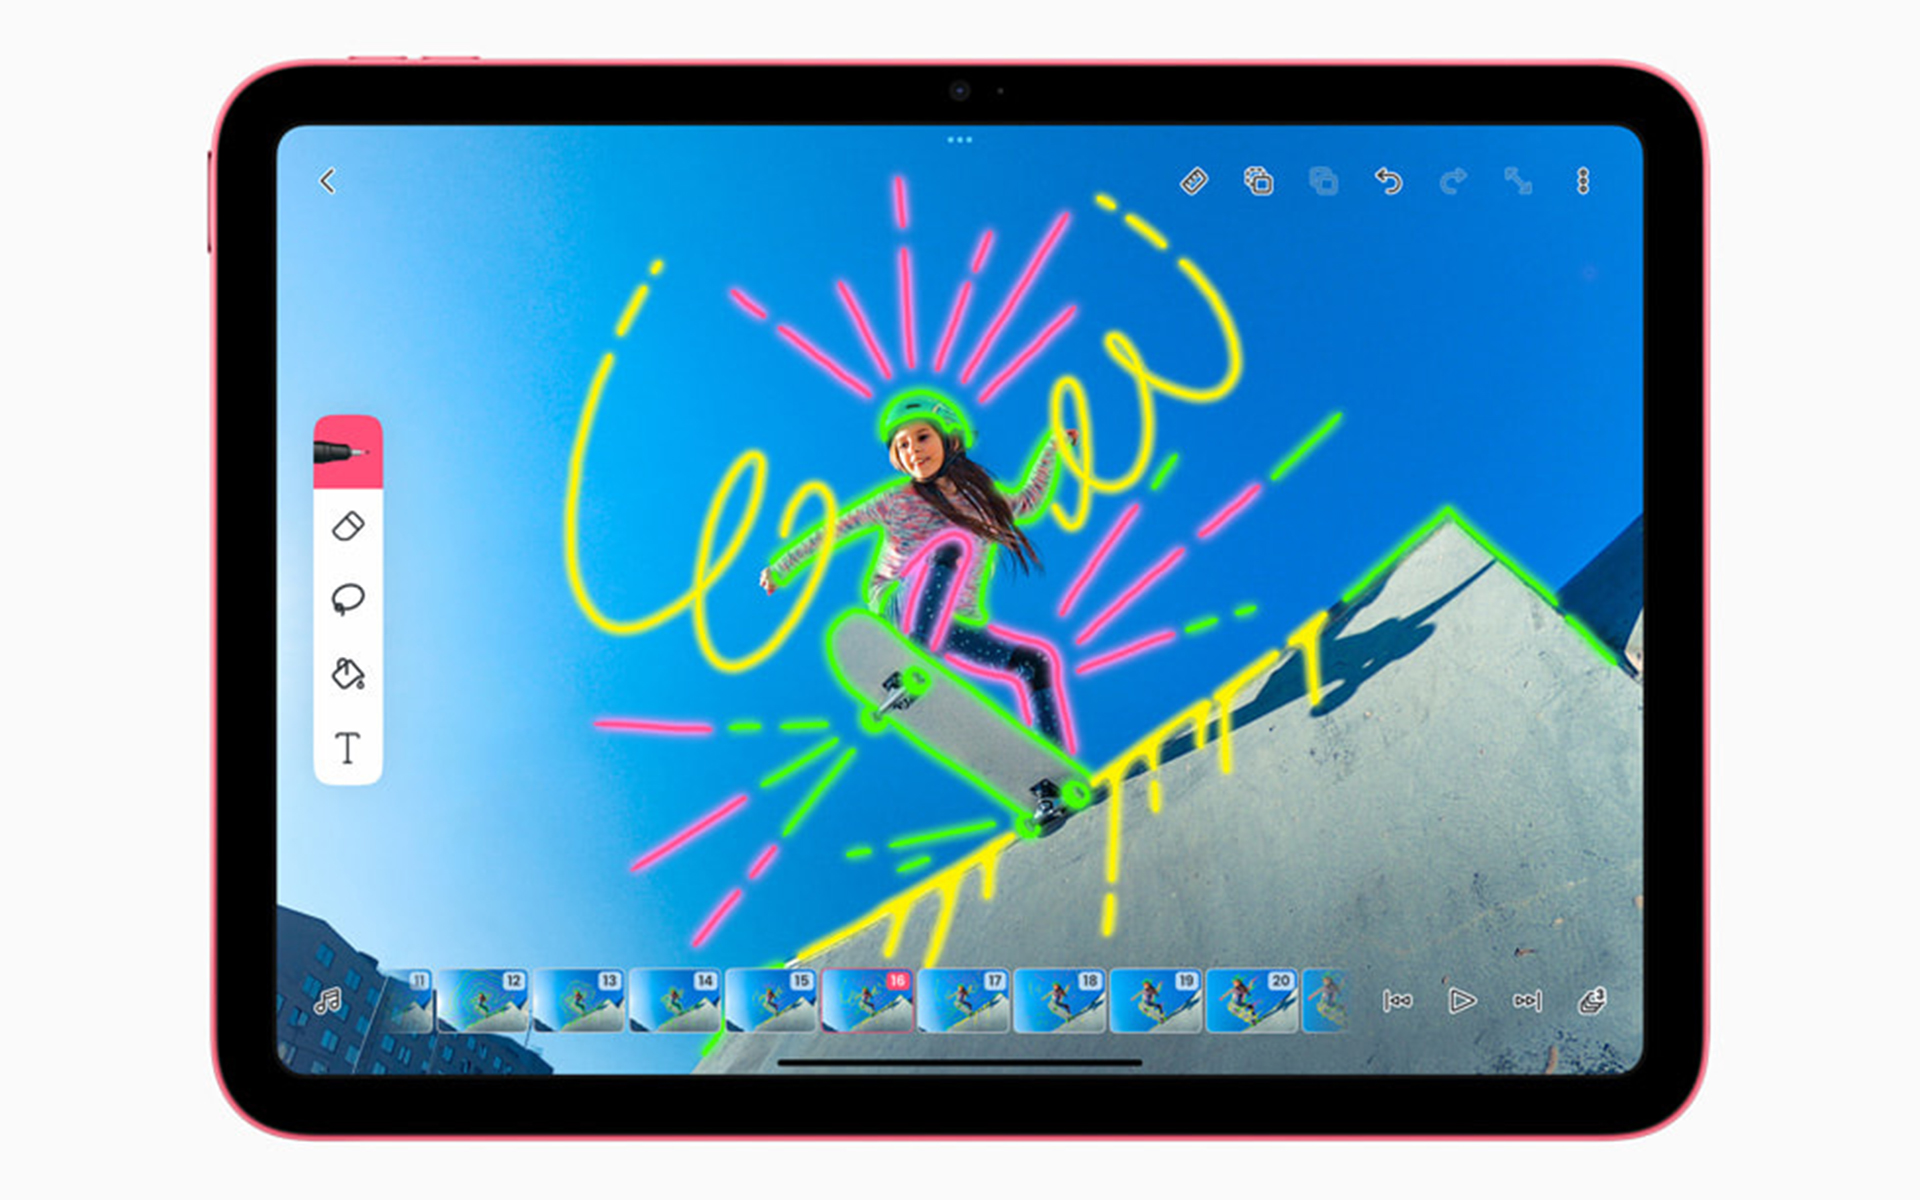 Image editing page of the 10th generation Apple iPad